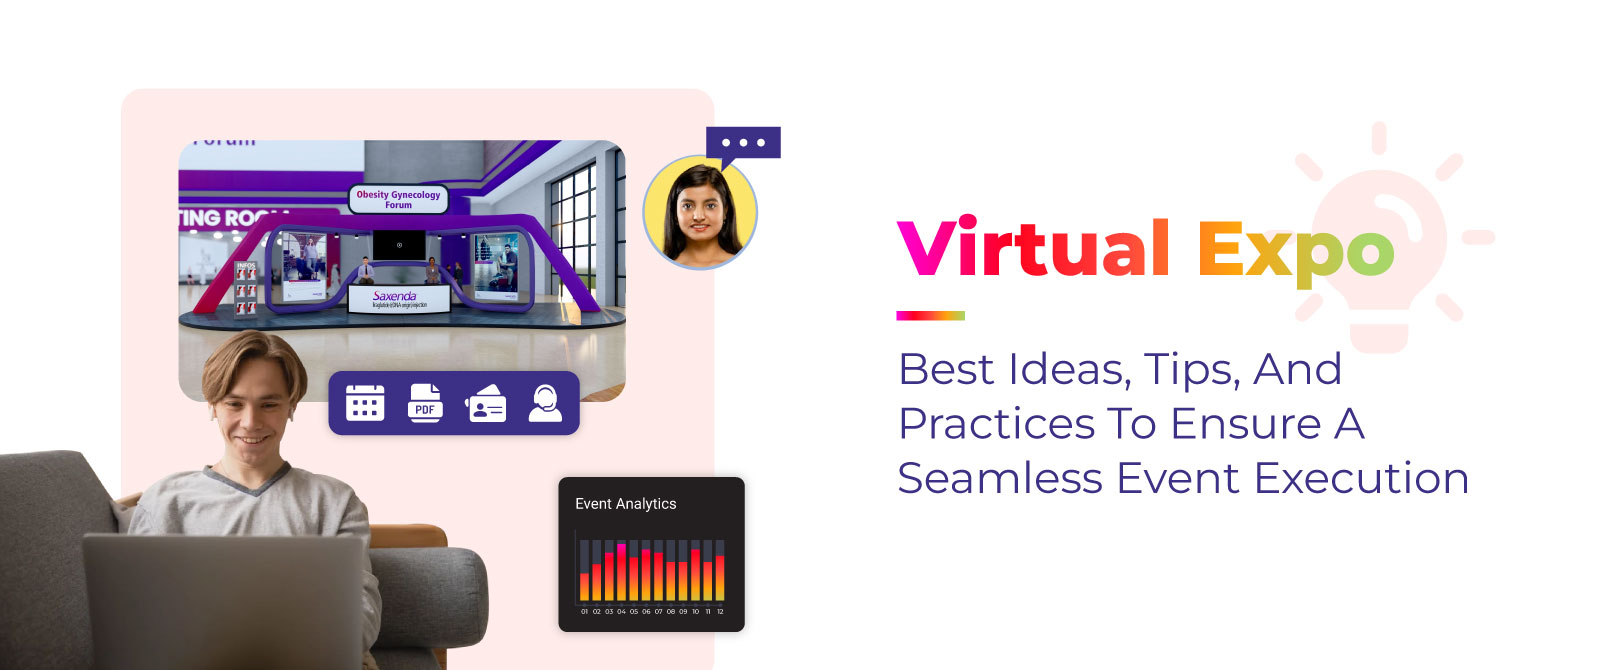 Virtual Expo – Best Ideas, Tips, and Practices to Ensure a Seamless Event Execution